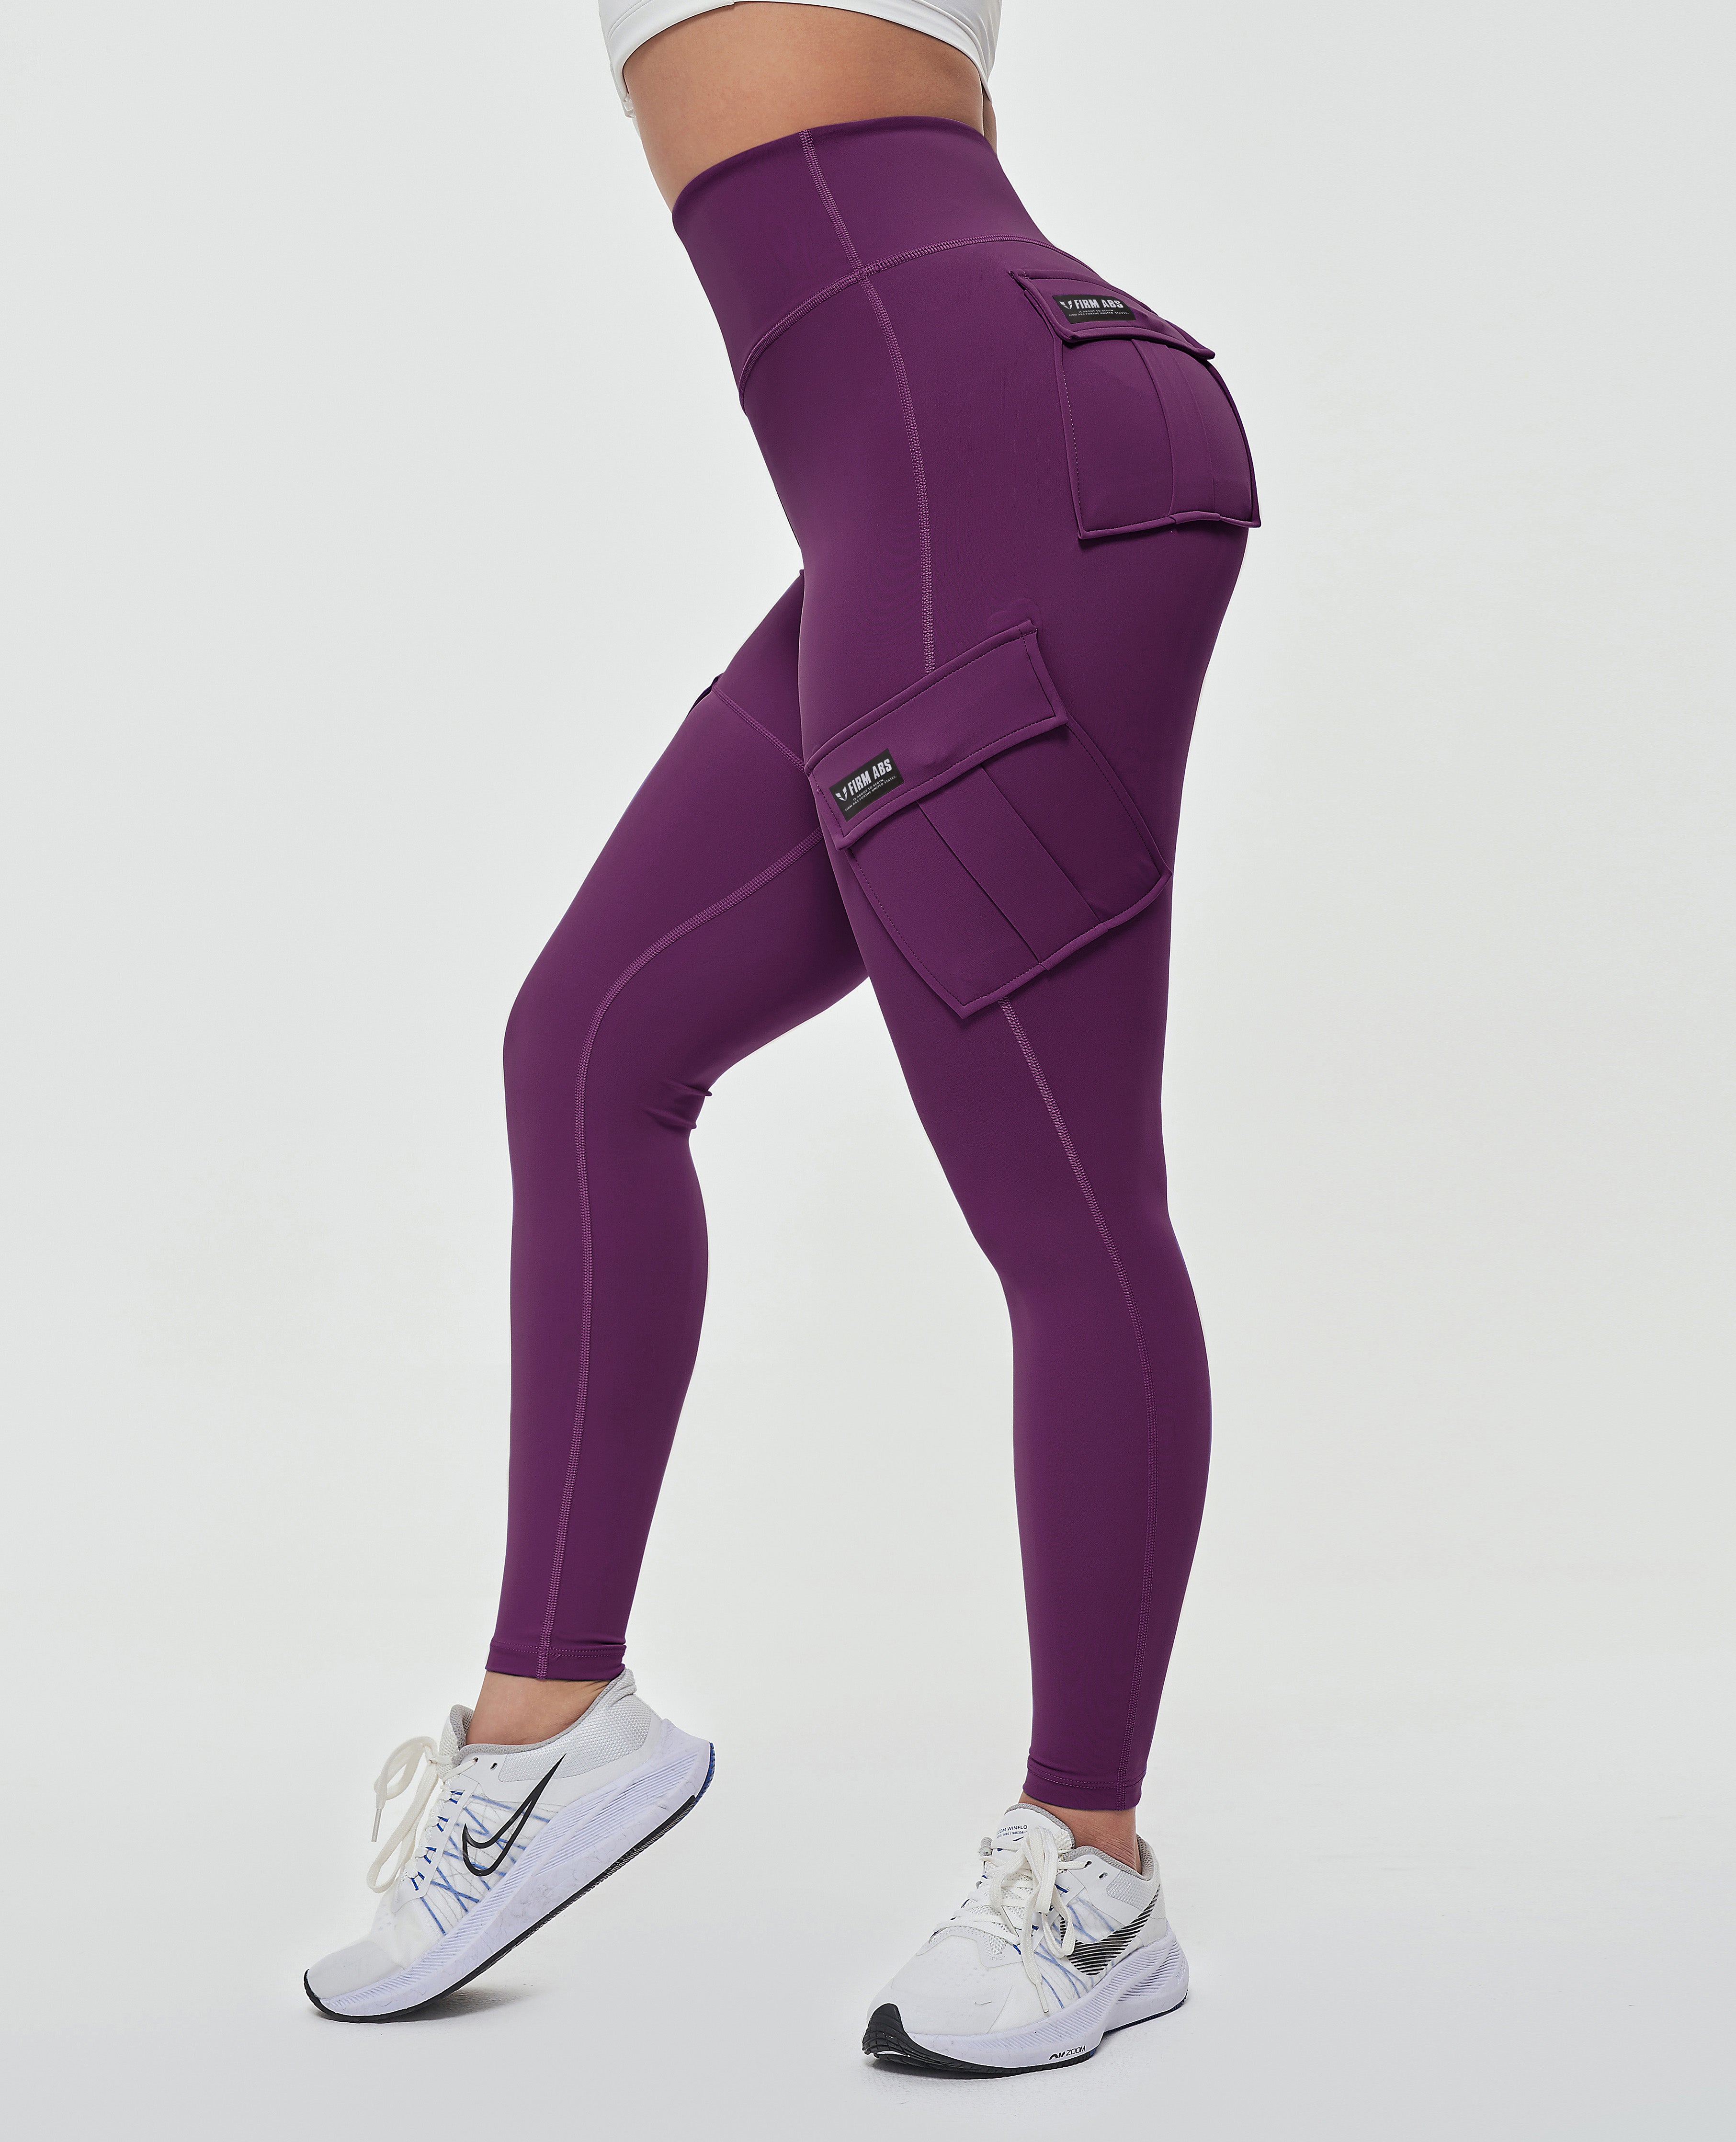 Two-tone sports legging in premium lycra Replay special fitness model